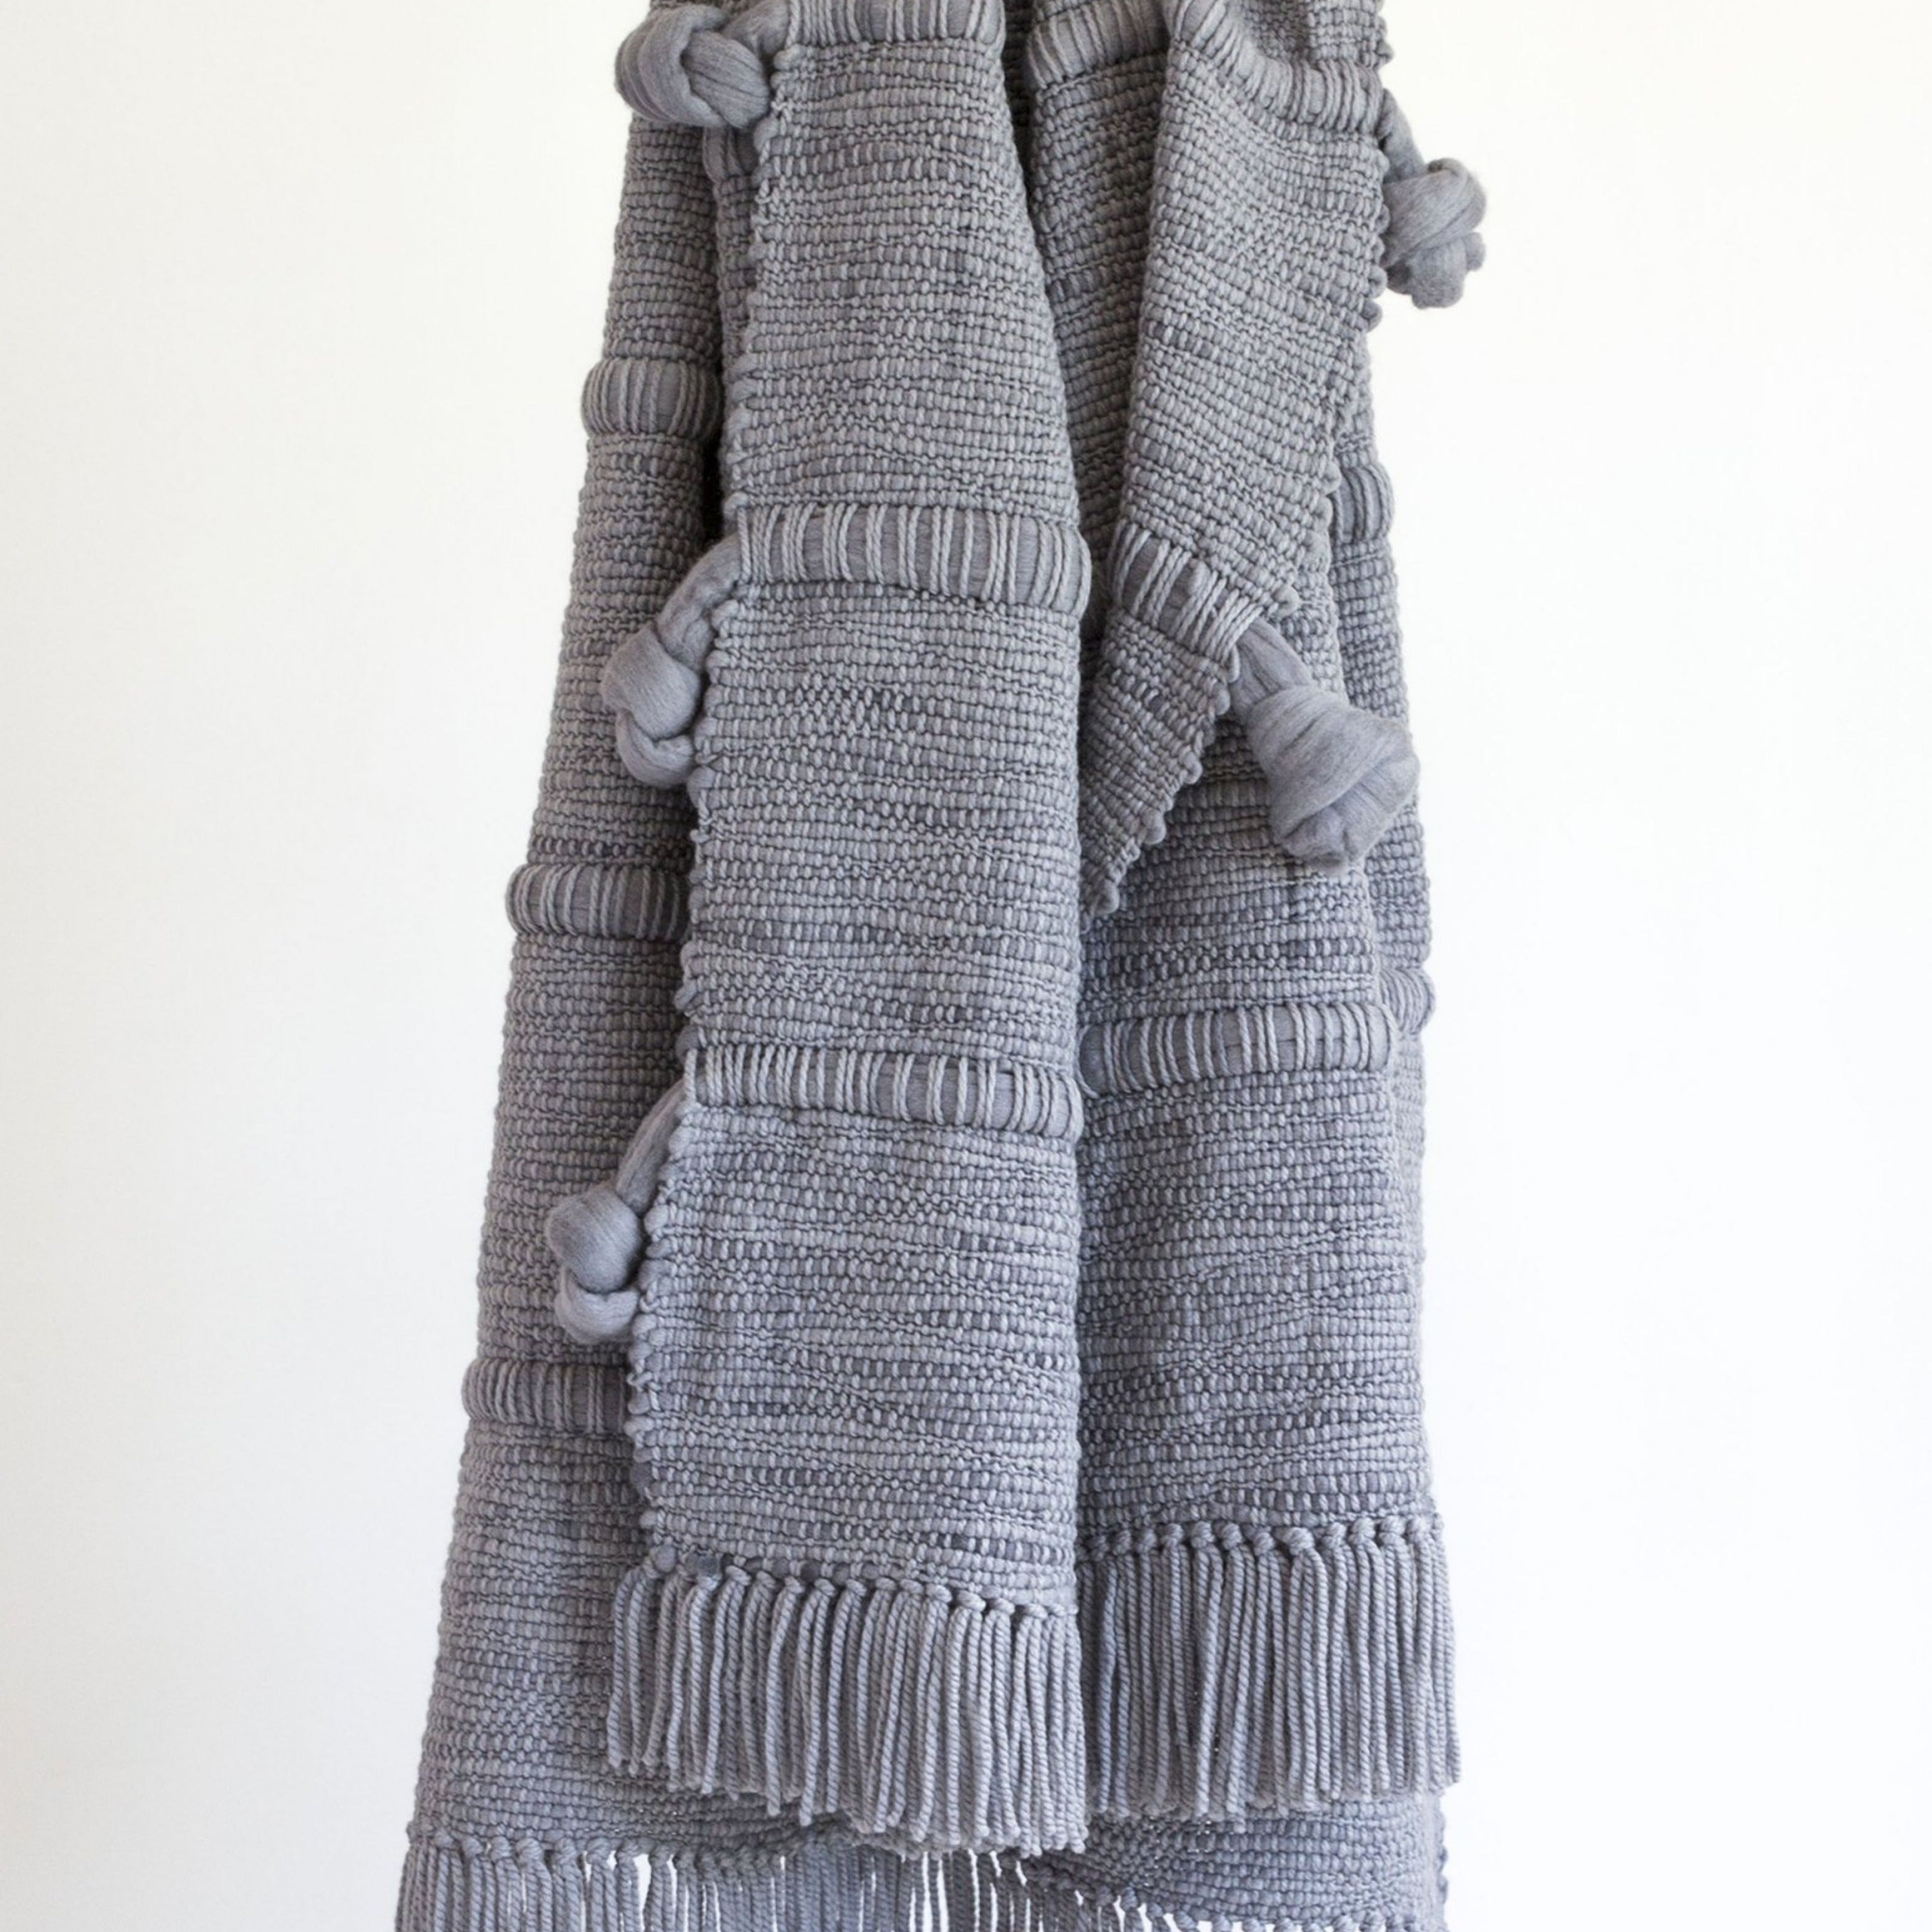 Knot Throw Blanket in Stone Grey 37x75